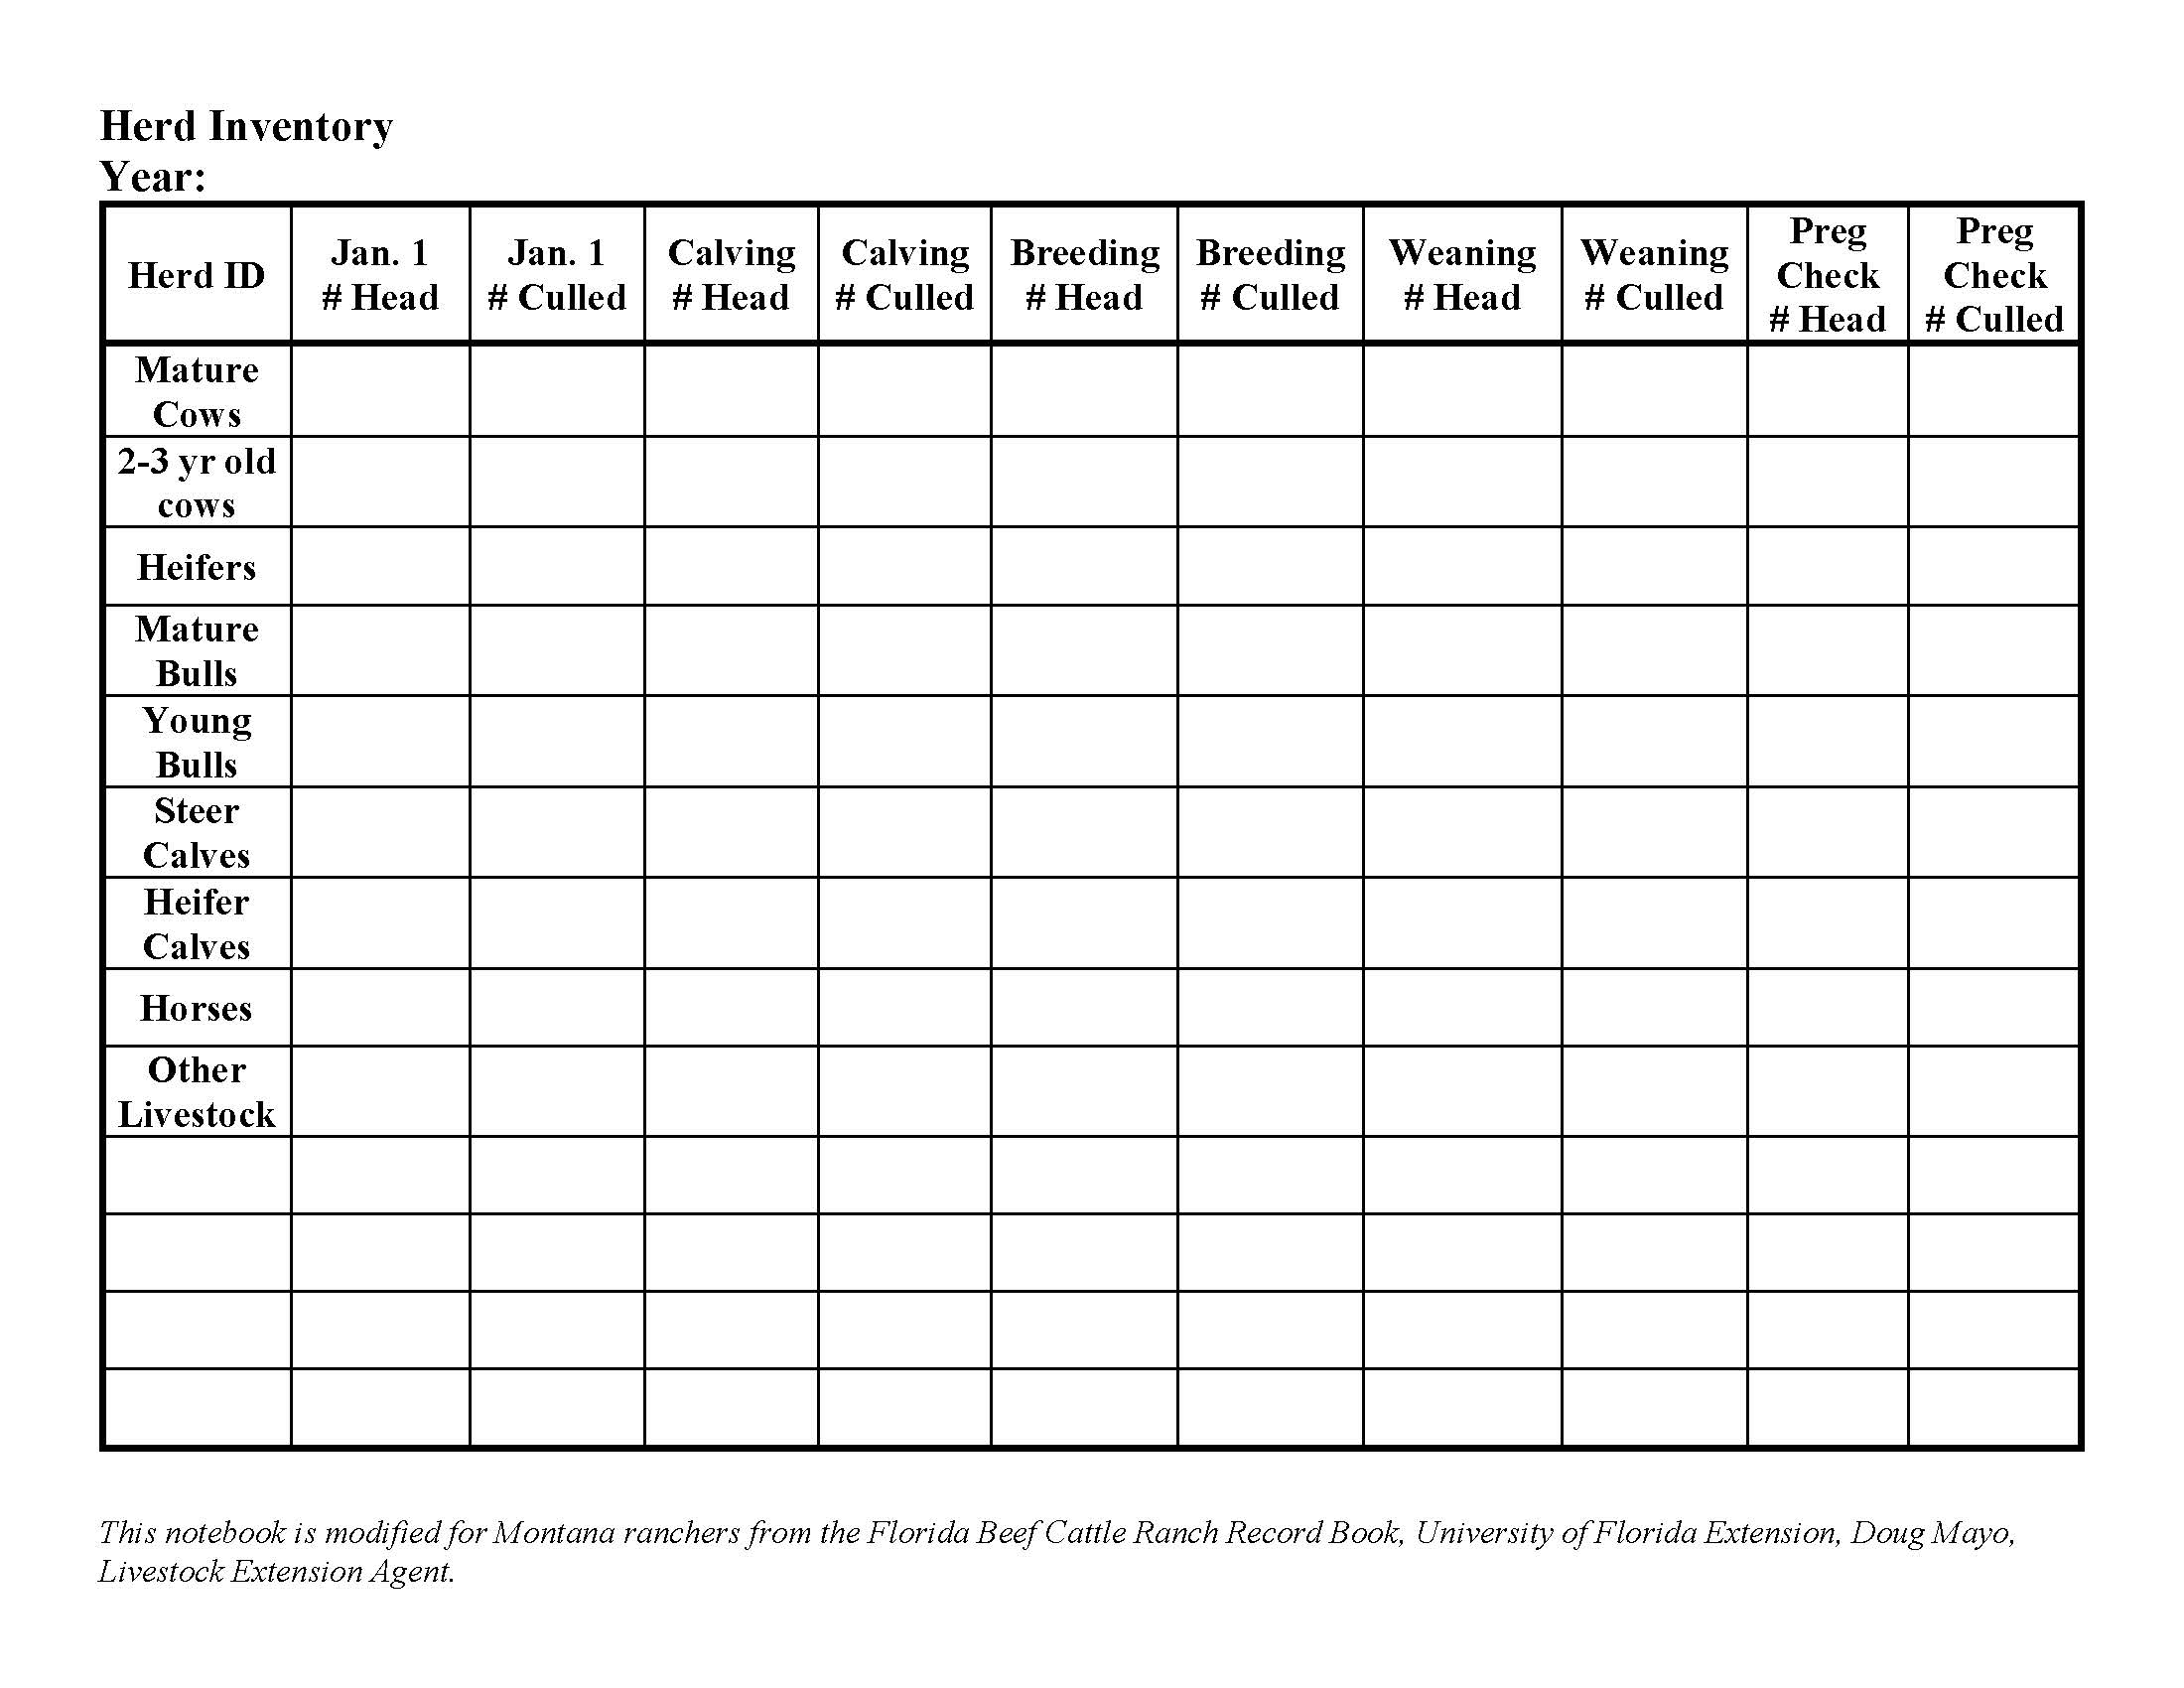 A sample table to keep records on herd inventory. Used in the rancher notebook.